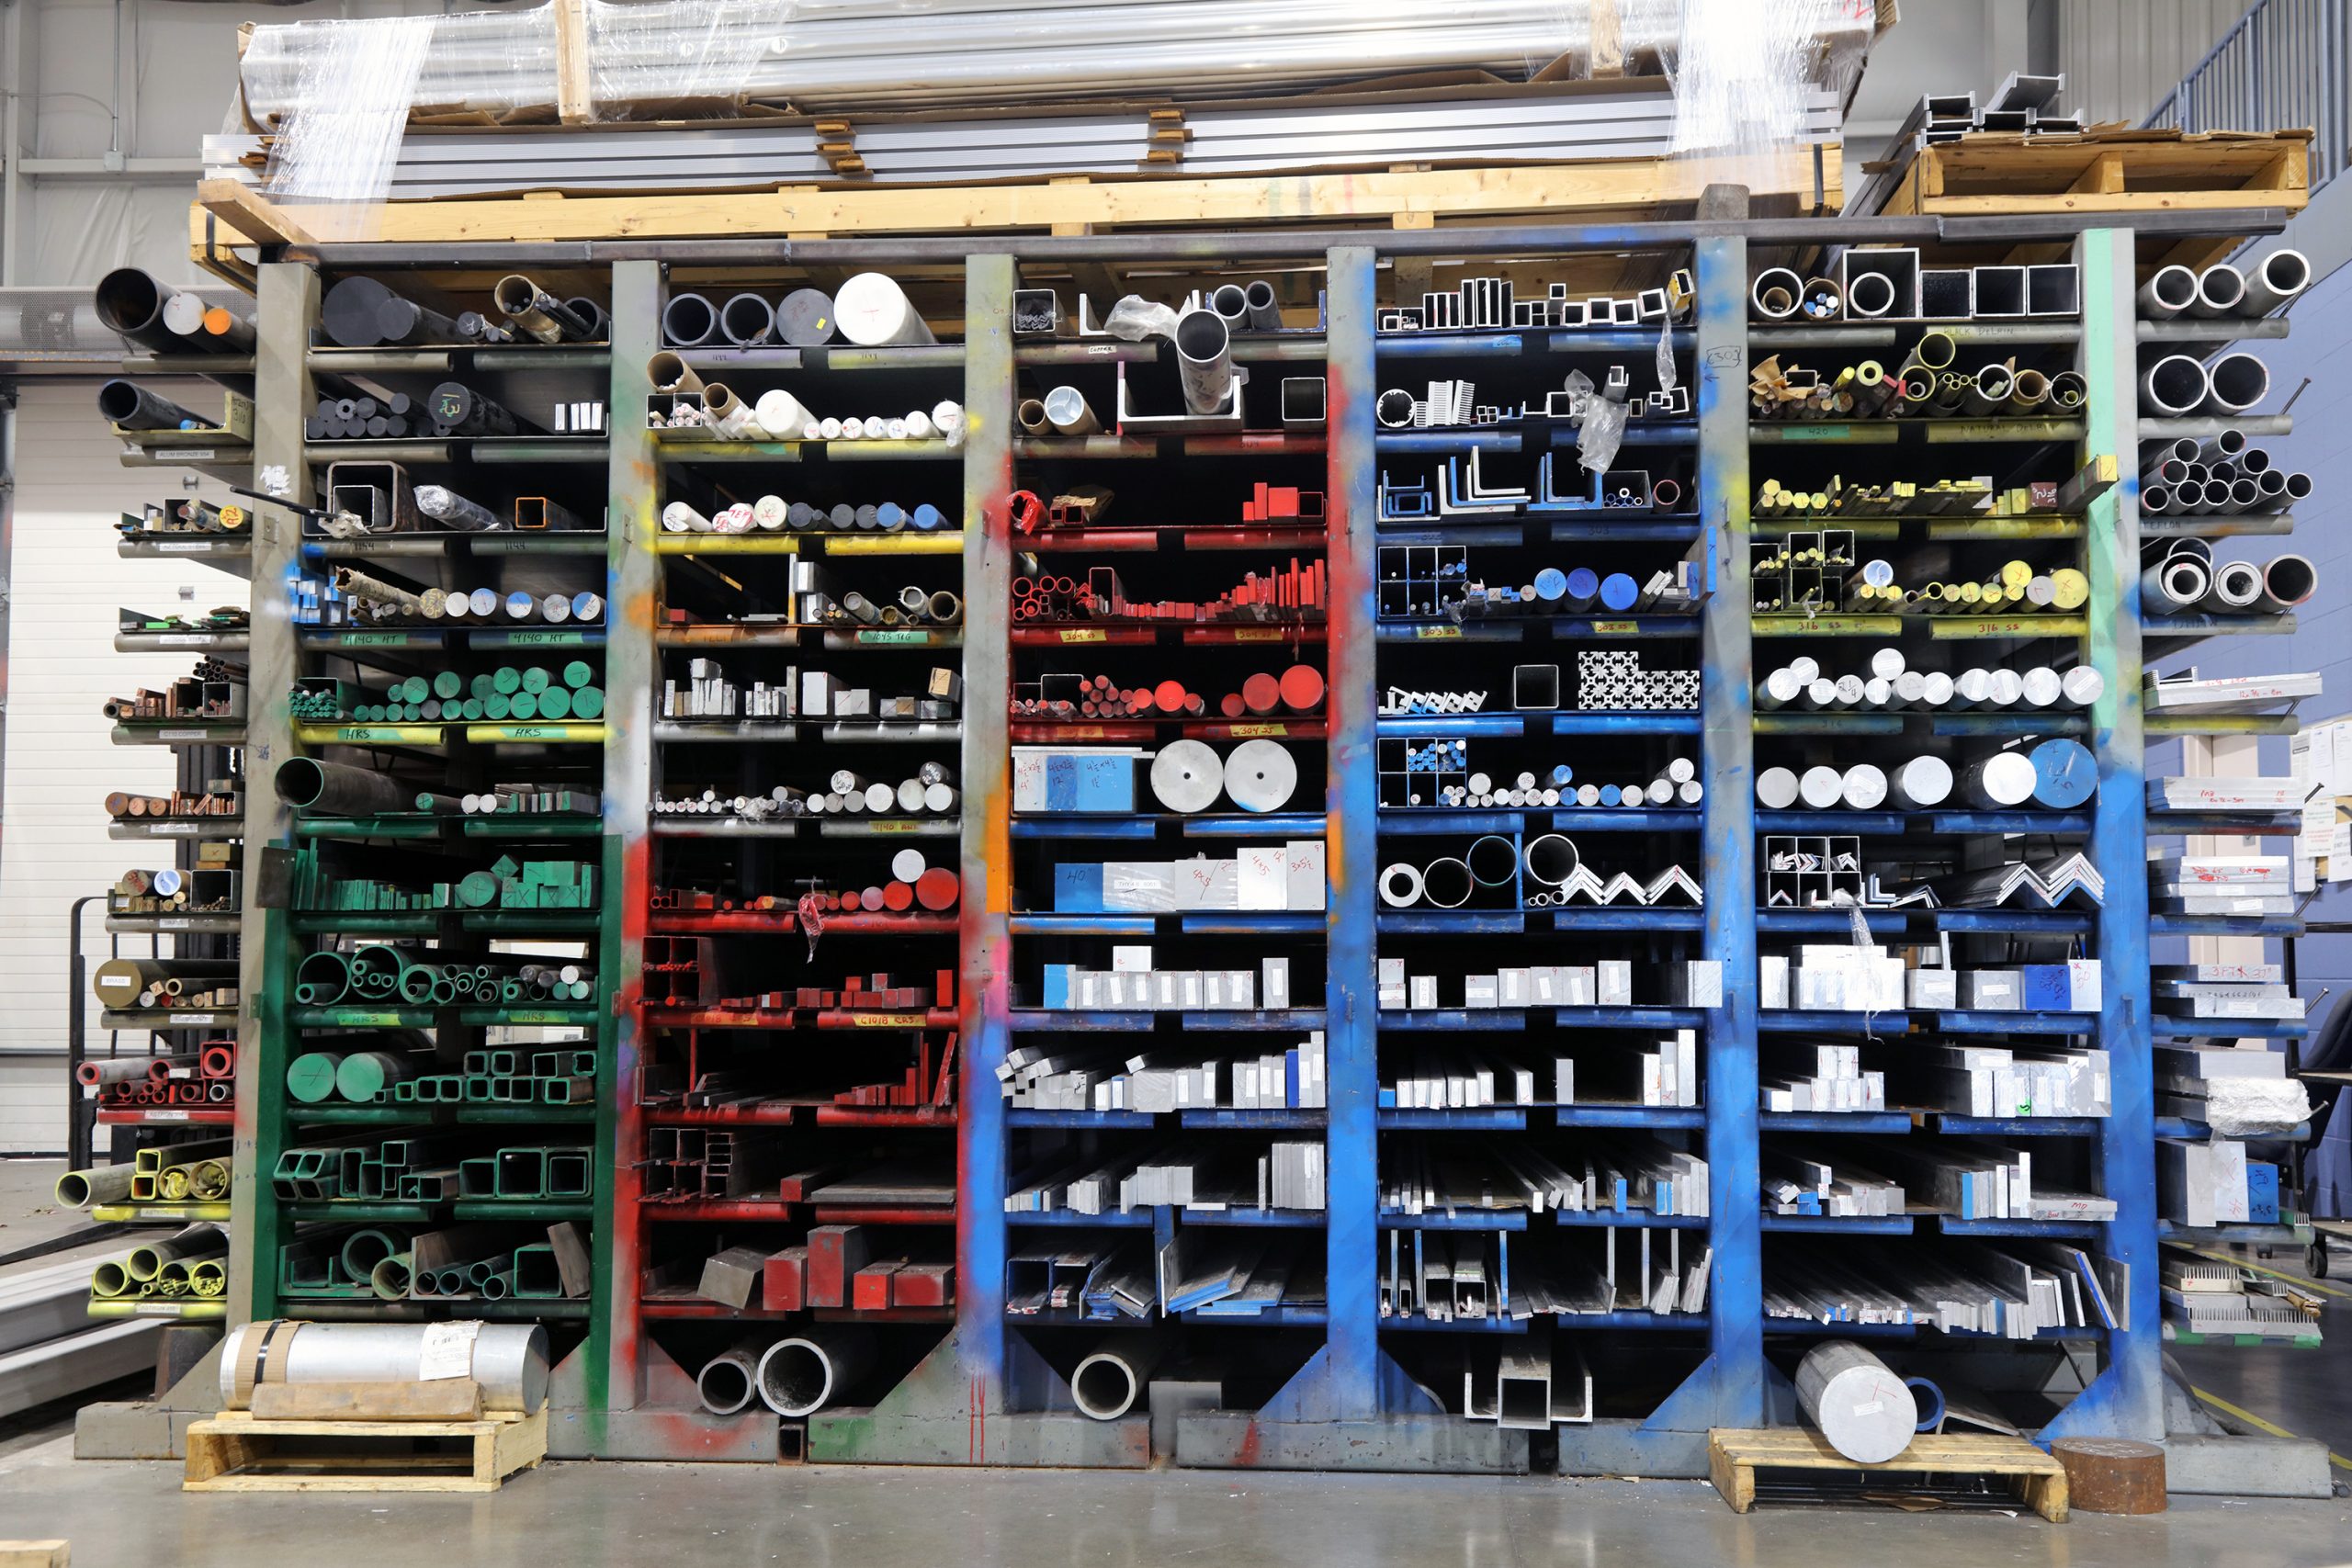 shelving units containing various raw materials that are colour coded based on their type